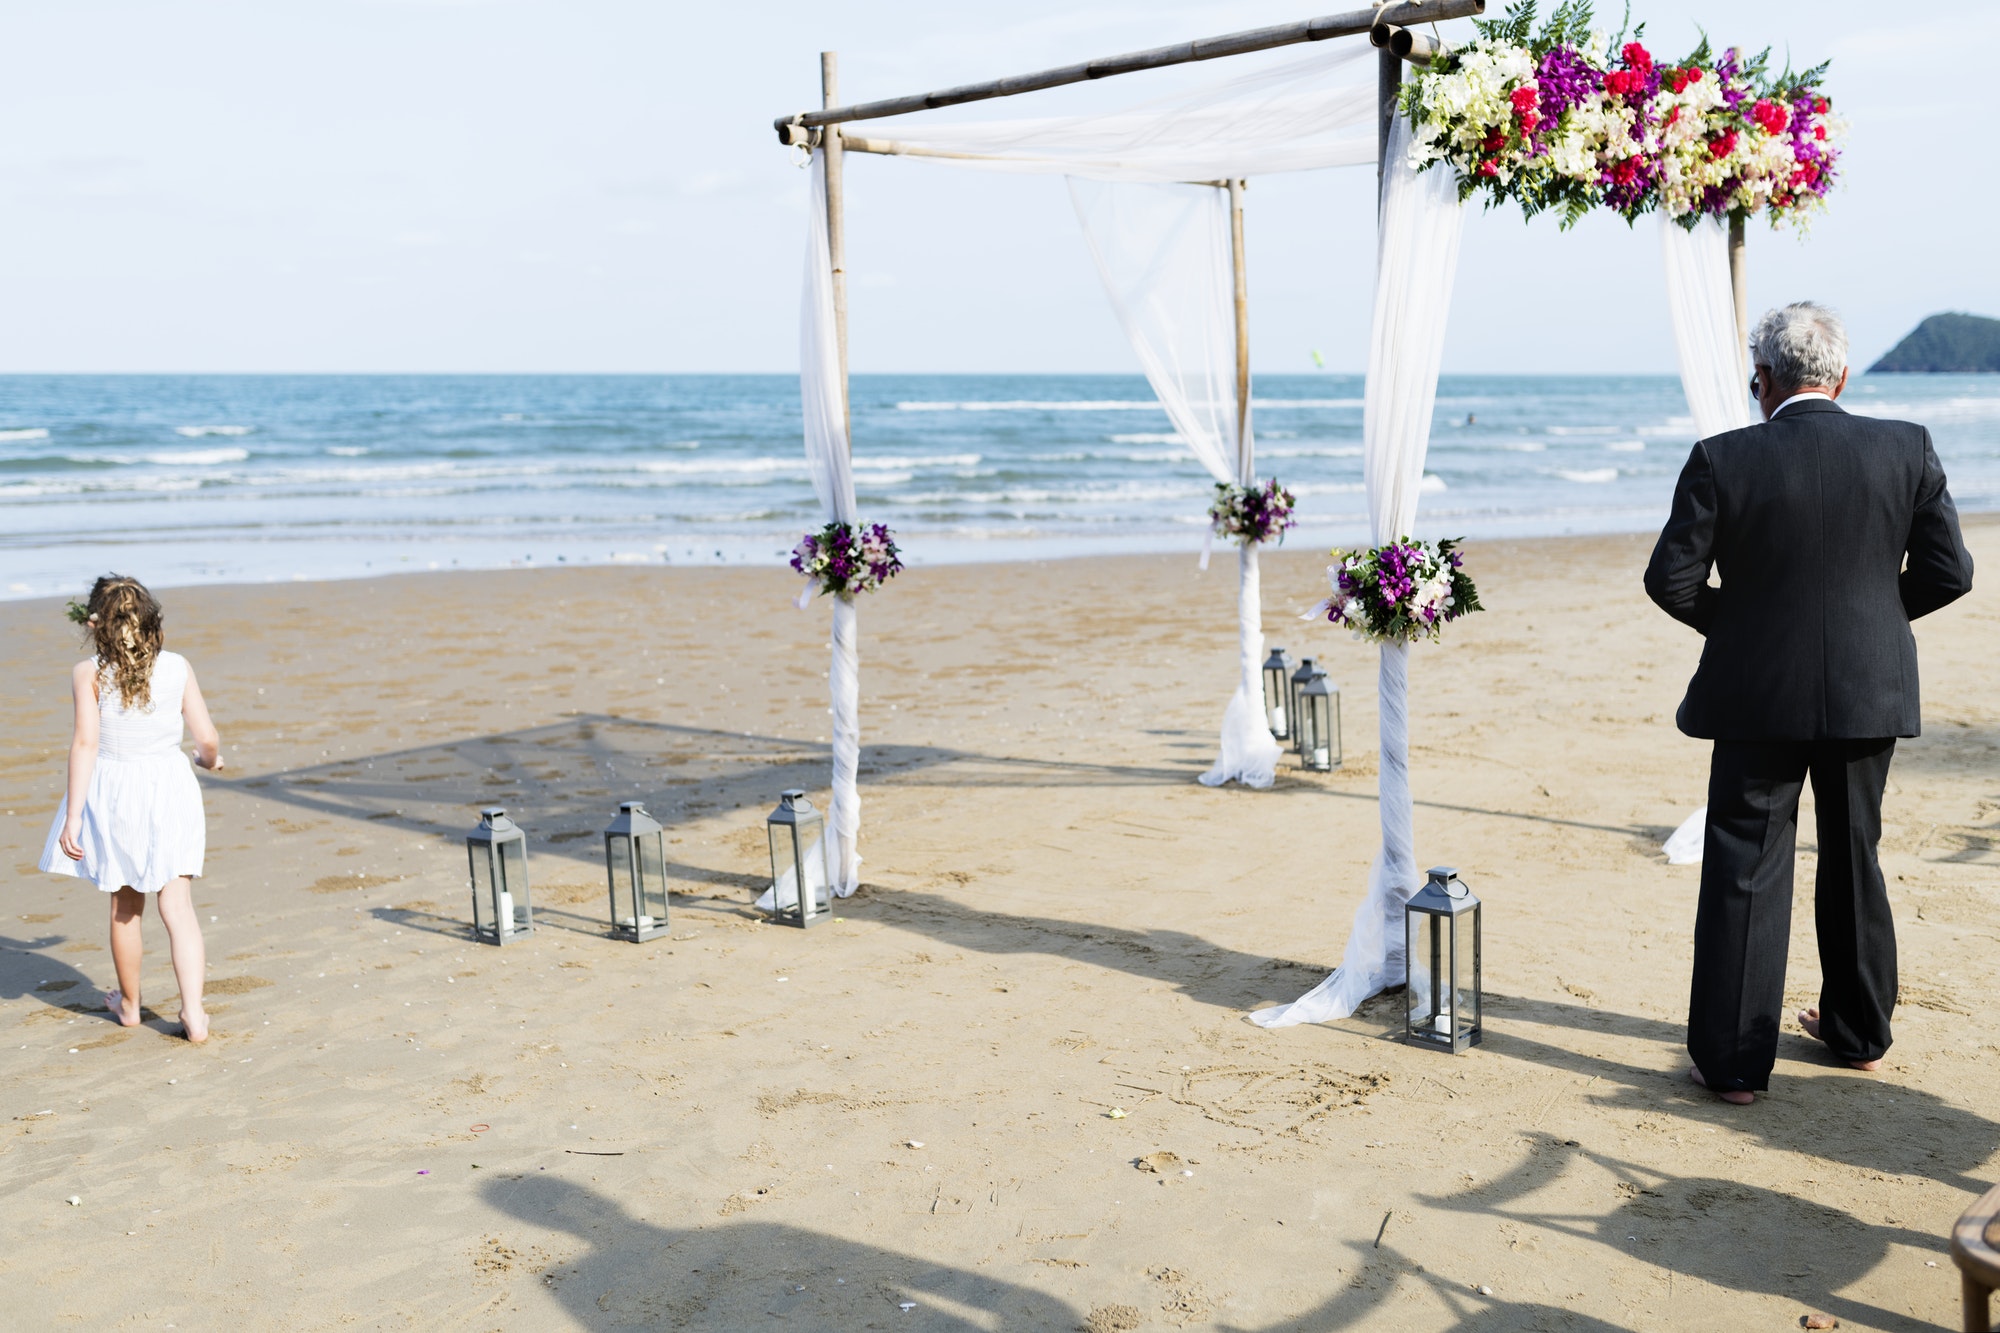 Guests at a beach wedding